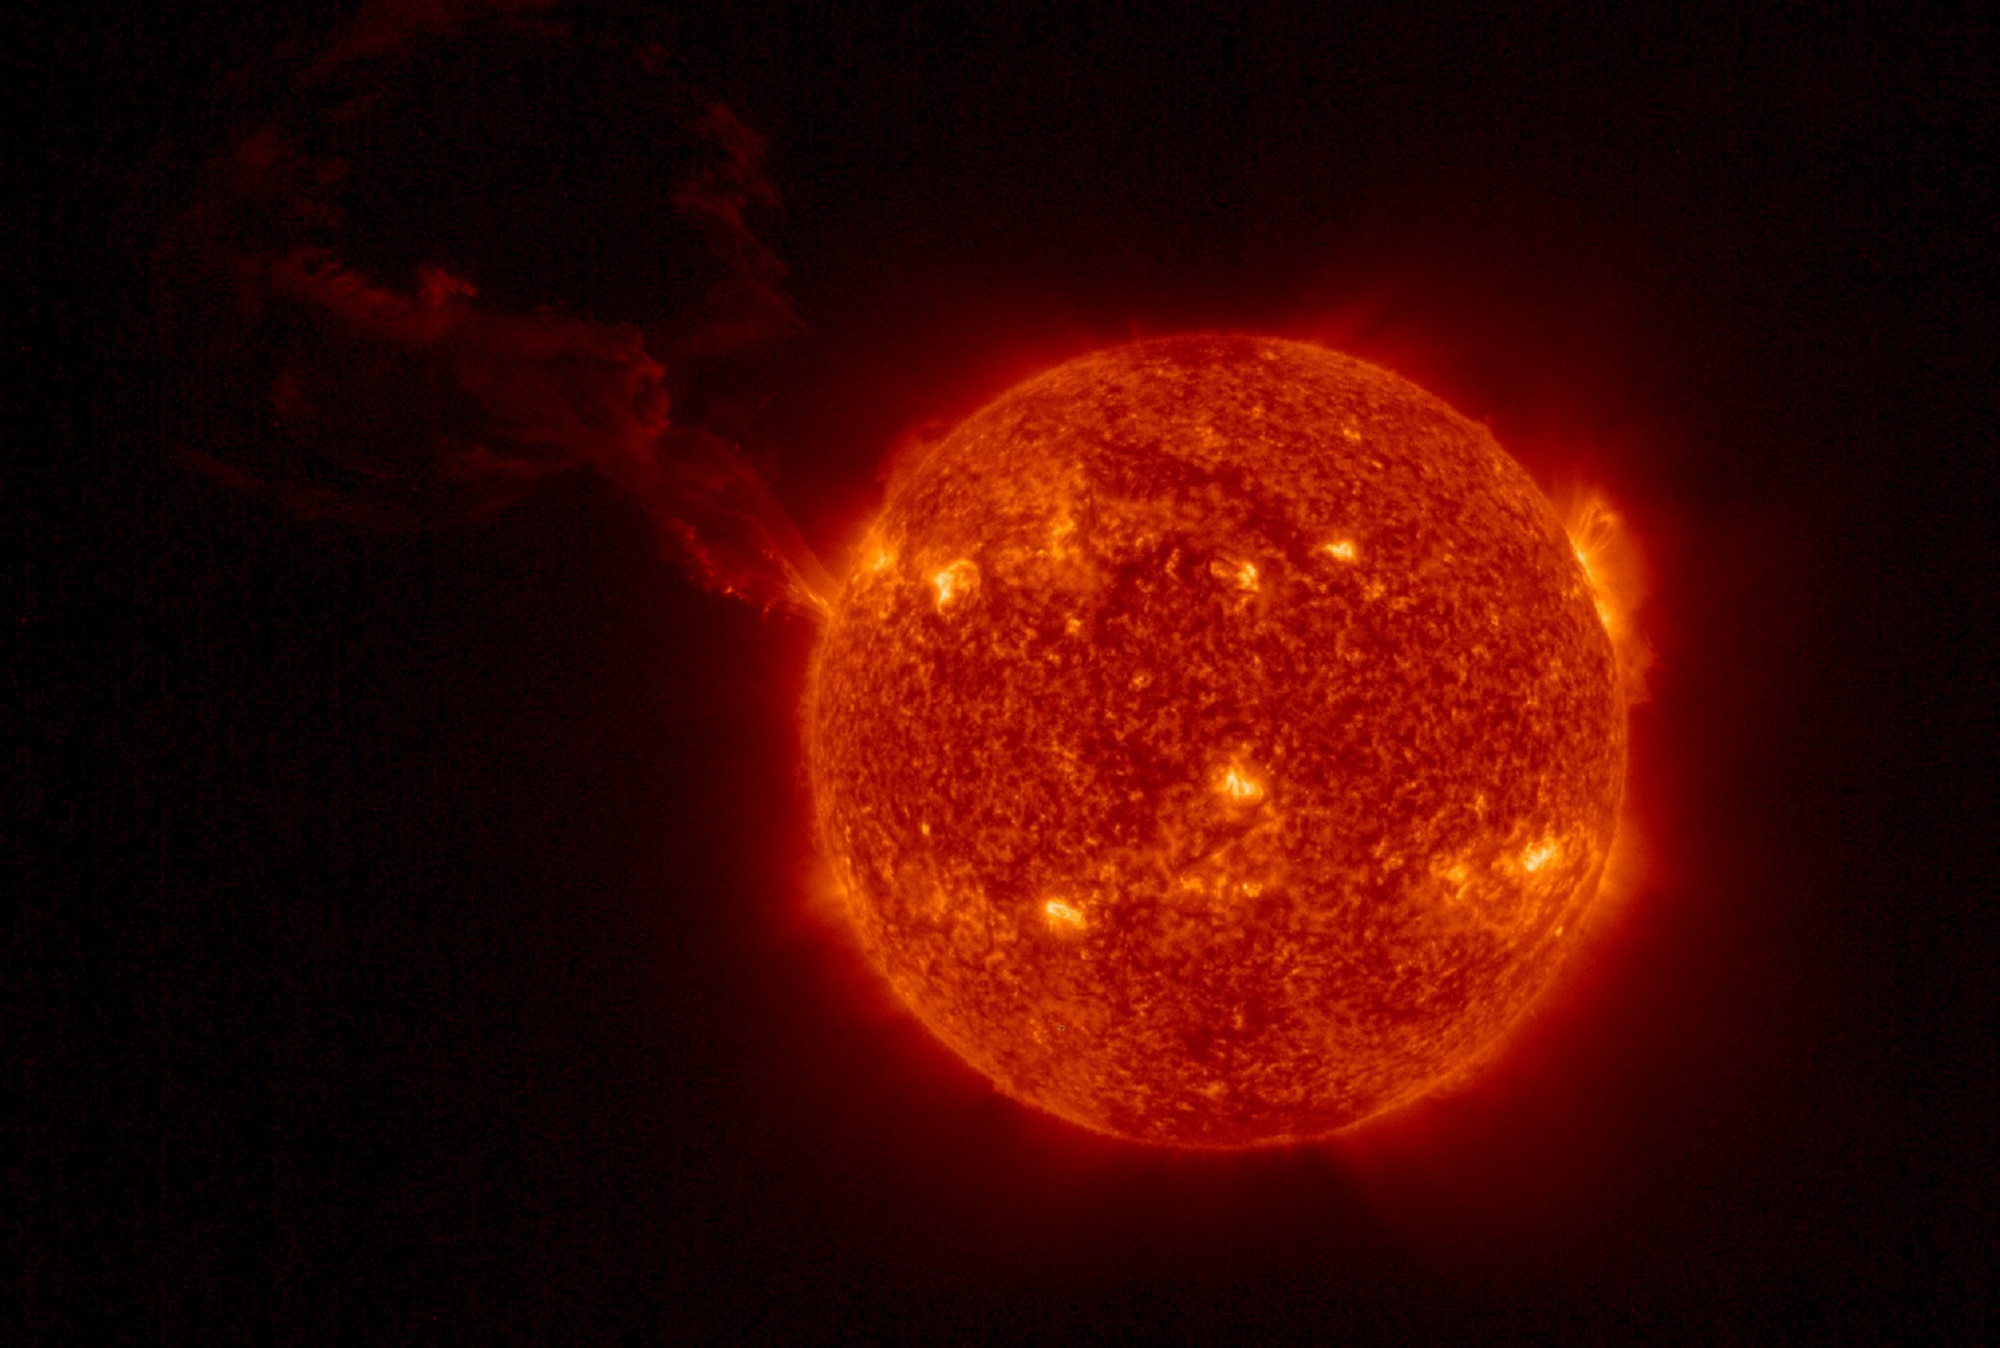 How worried should we be about solar flares and space weather?